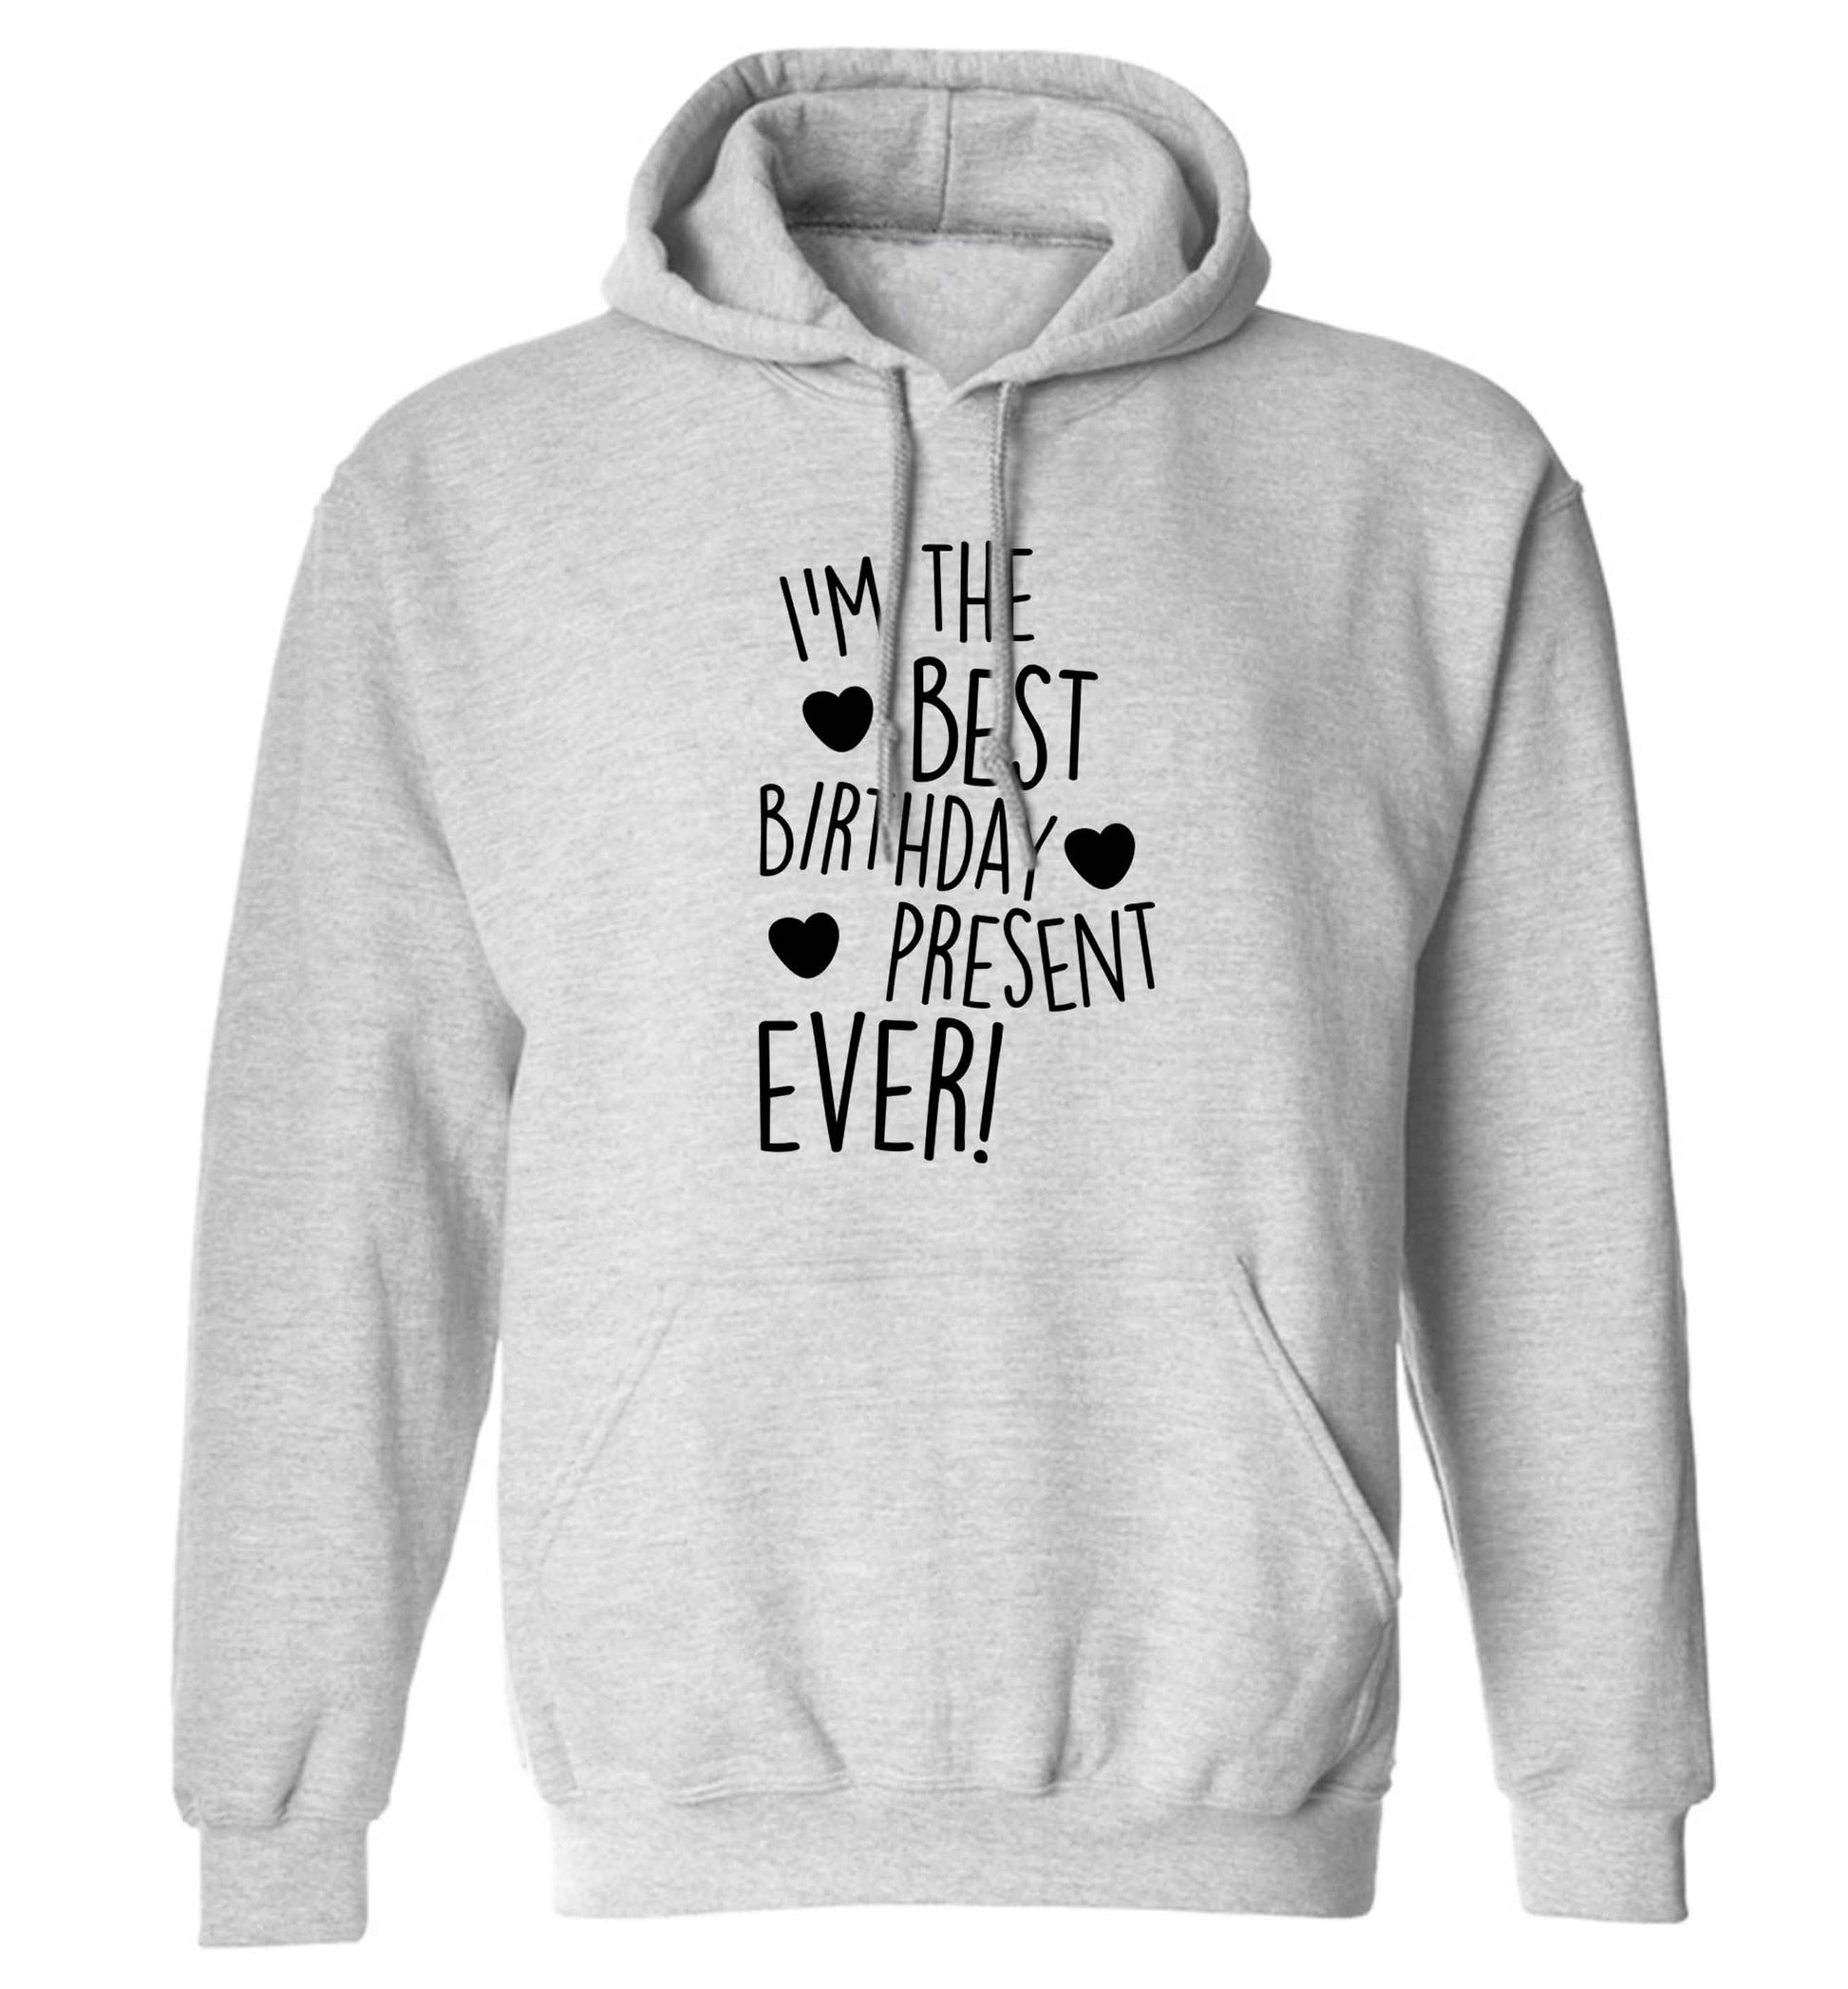 I'm the best birthday present ever adults unisex grey hoodie 2XL